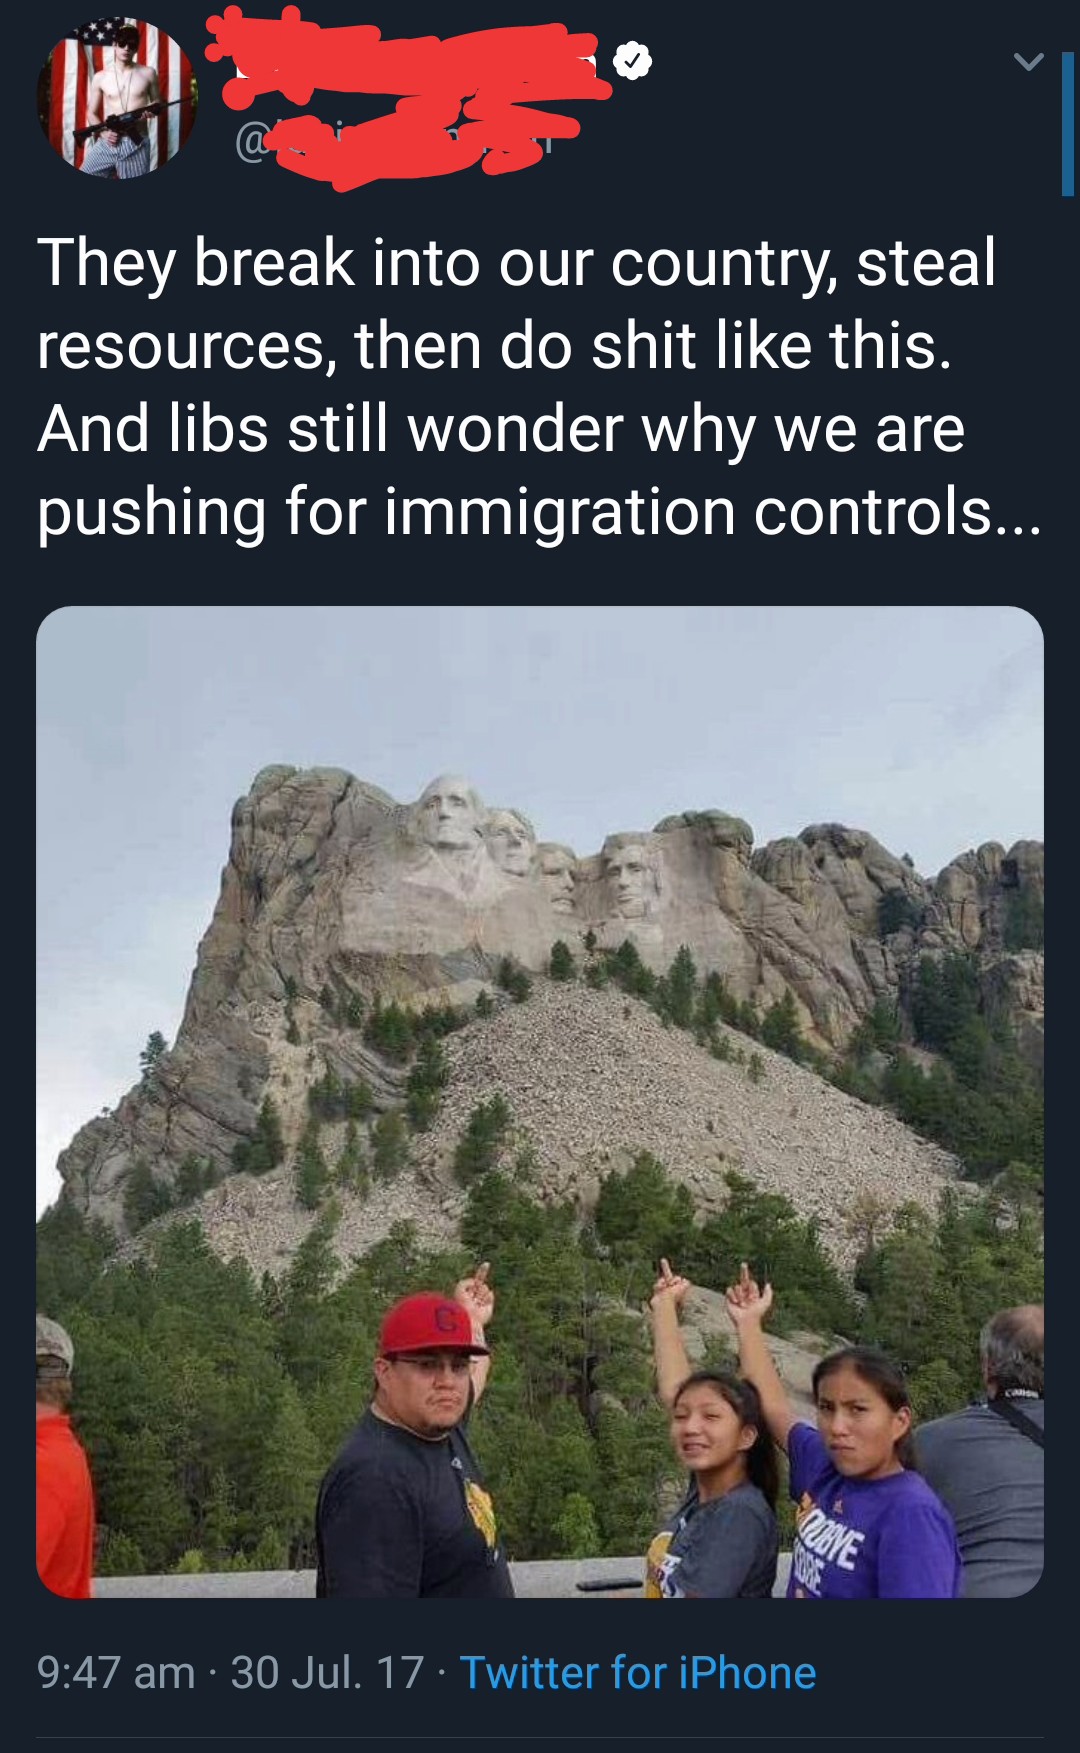 mount rushmore - They break into our country, steal resources, then do shit this. And libs still wonder why we are pushing for immigration controls... 30 Jul. 17. Twitter for iPhone